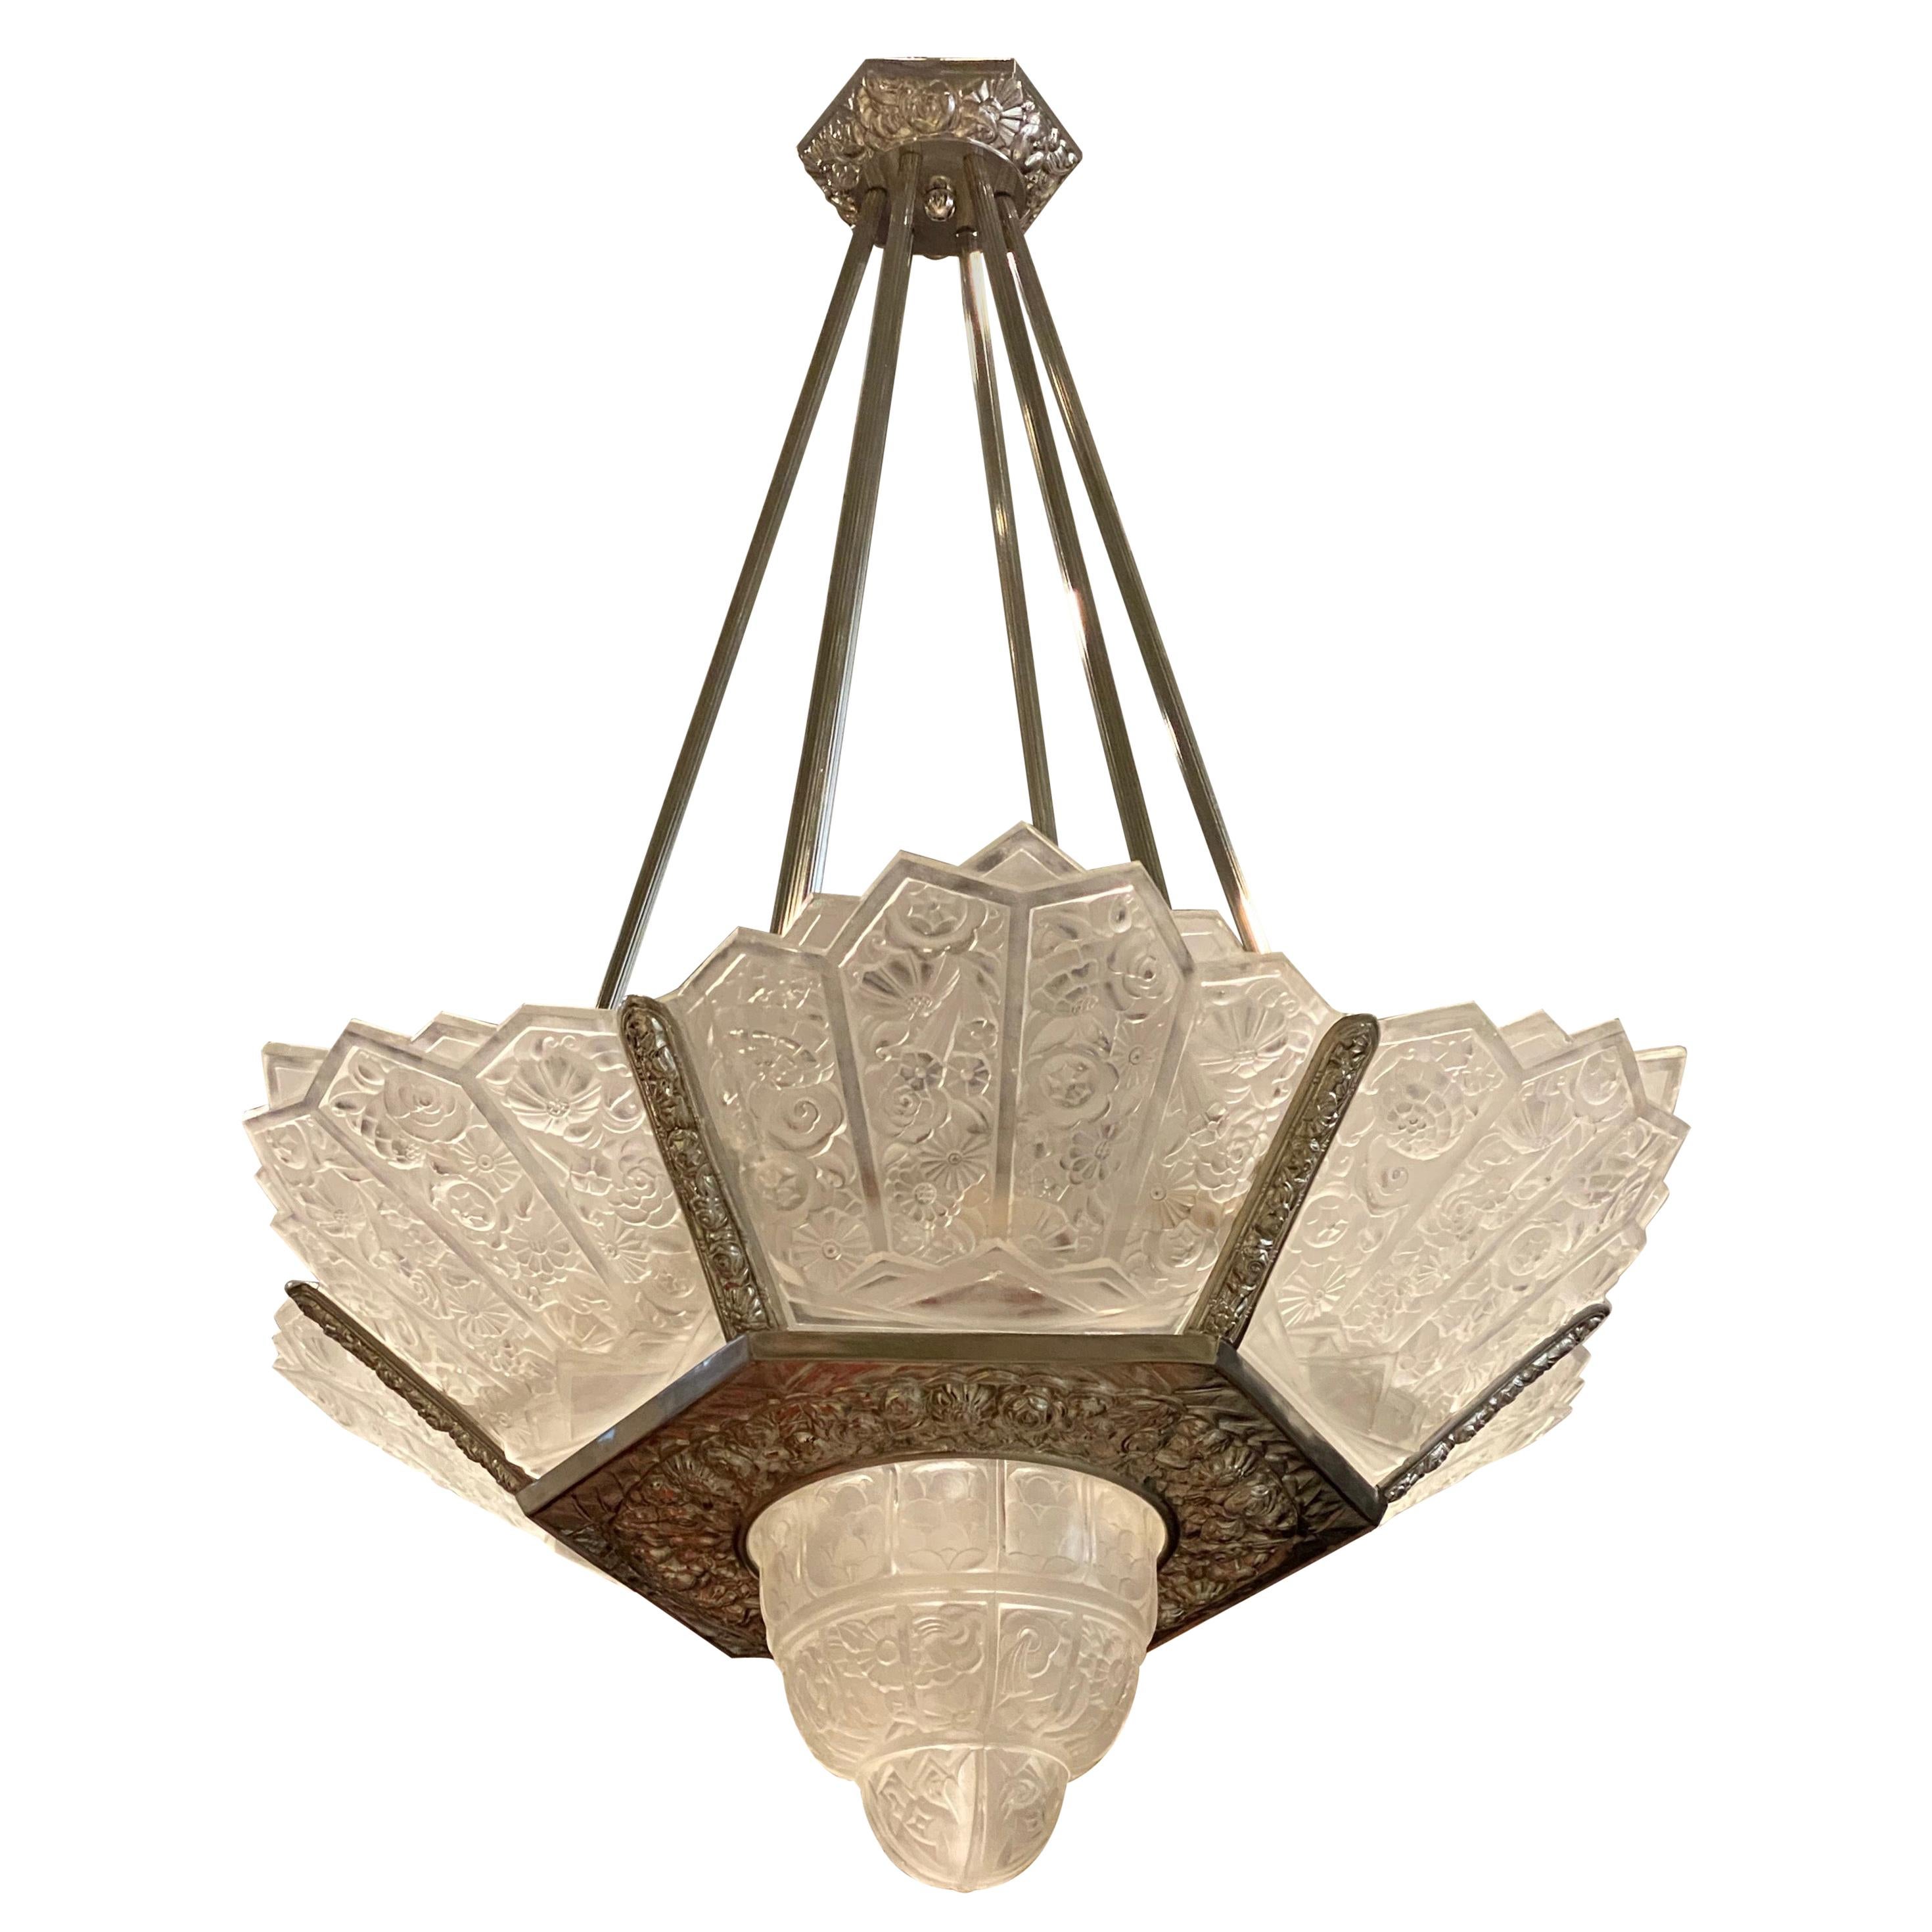 Grand French Art Deco Chandelier by Hettier Vincent For Sale